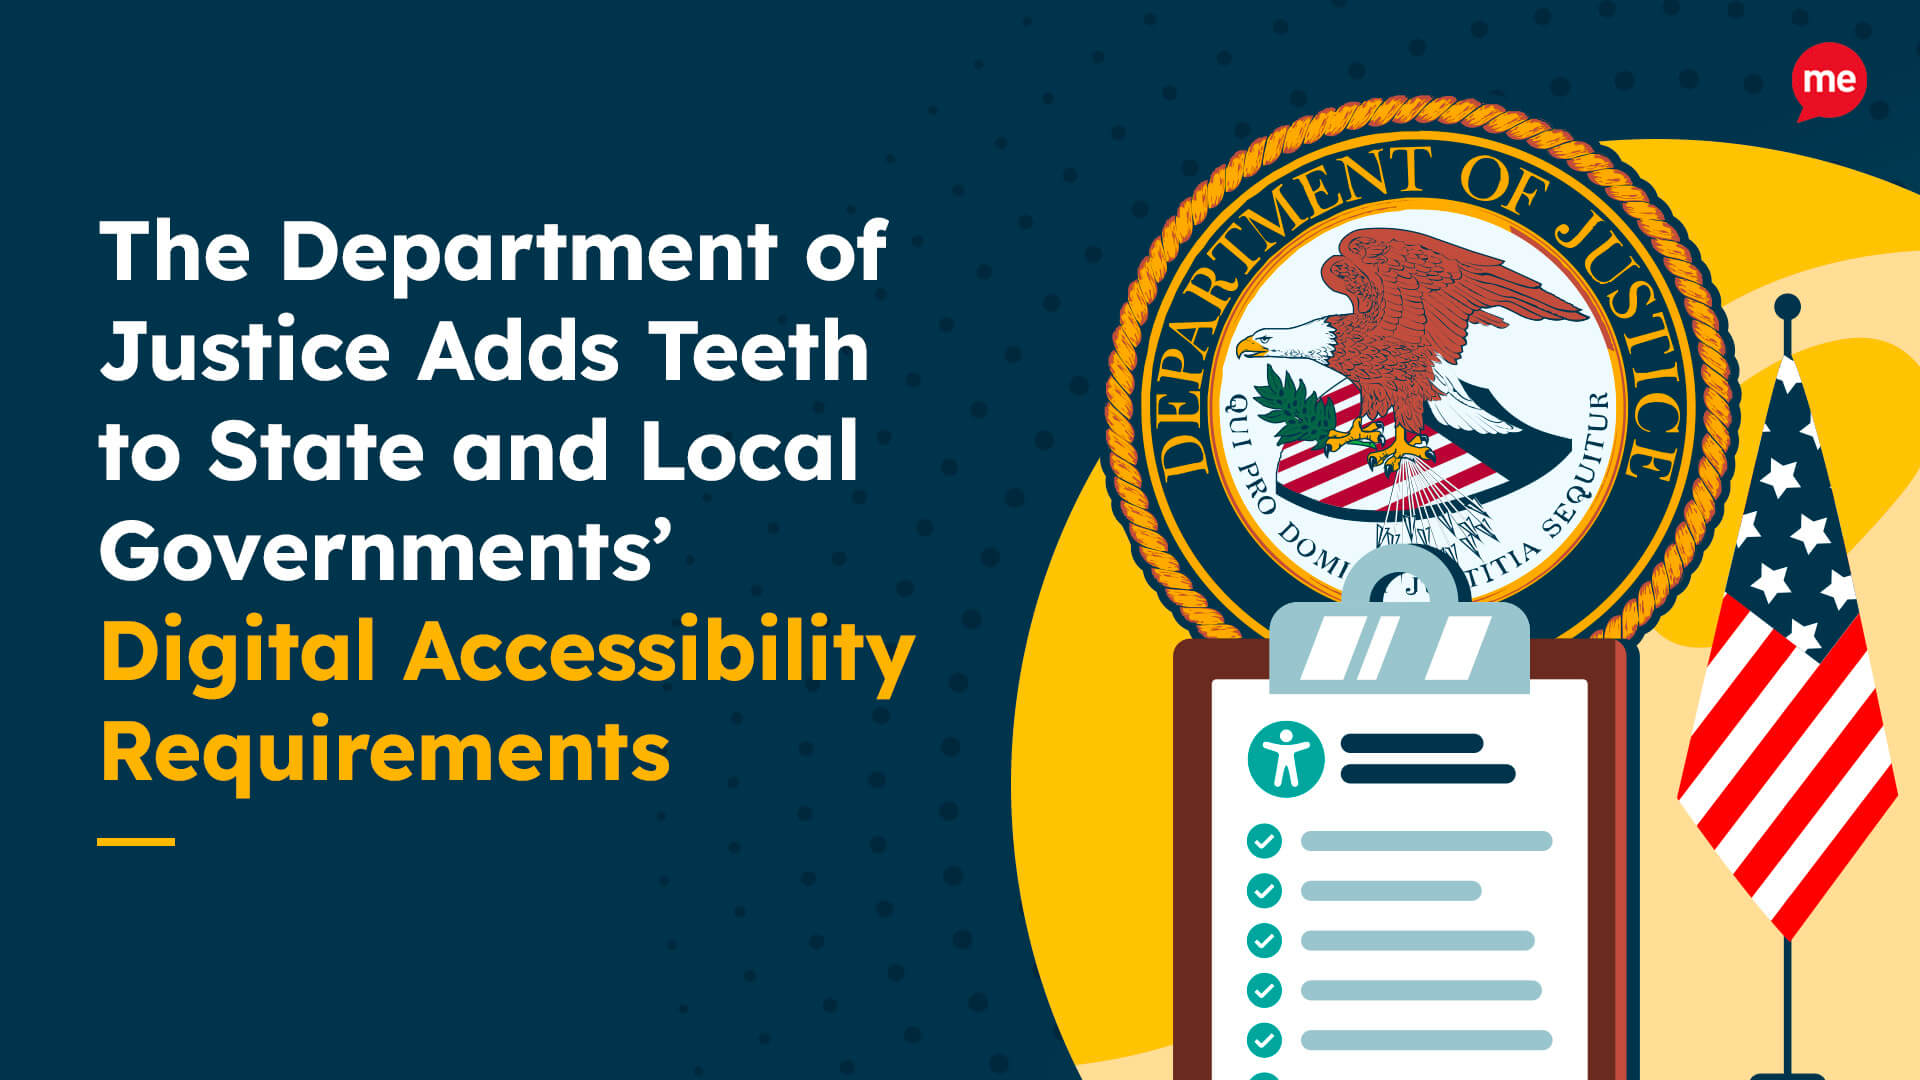 The Department of Justice Adds Teeth to State and Local Governments’ Digital Accessibility Requirements